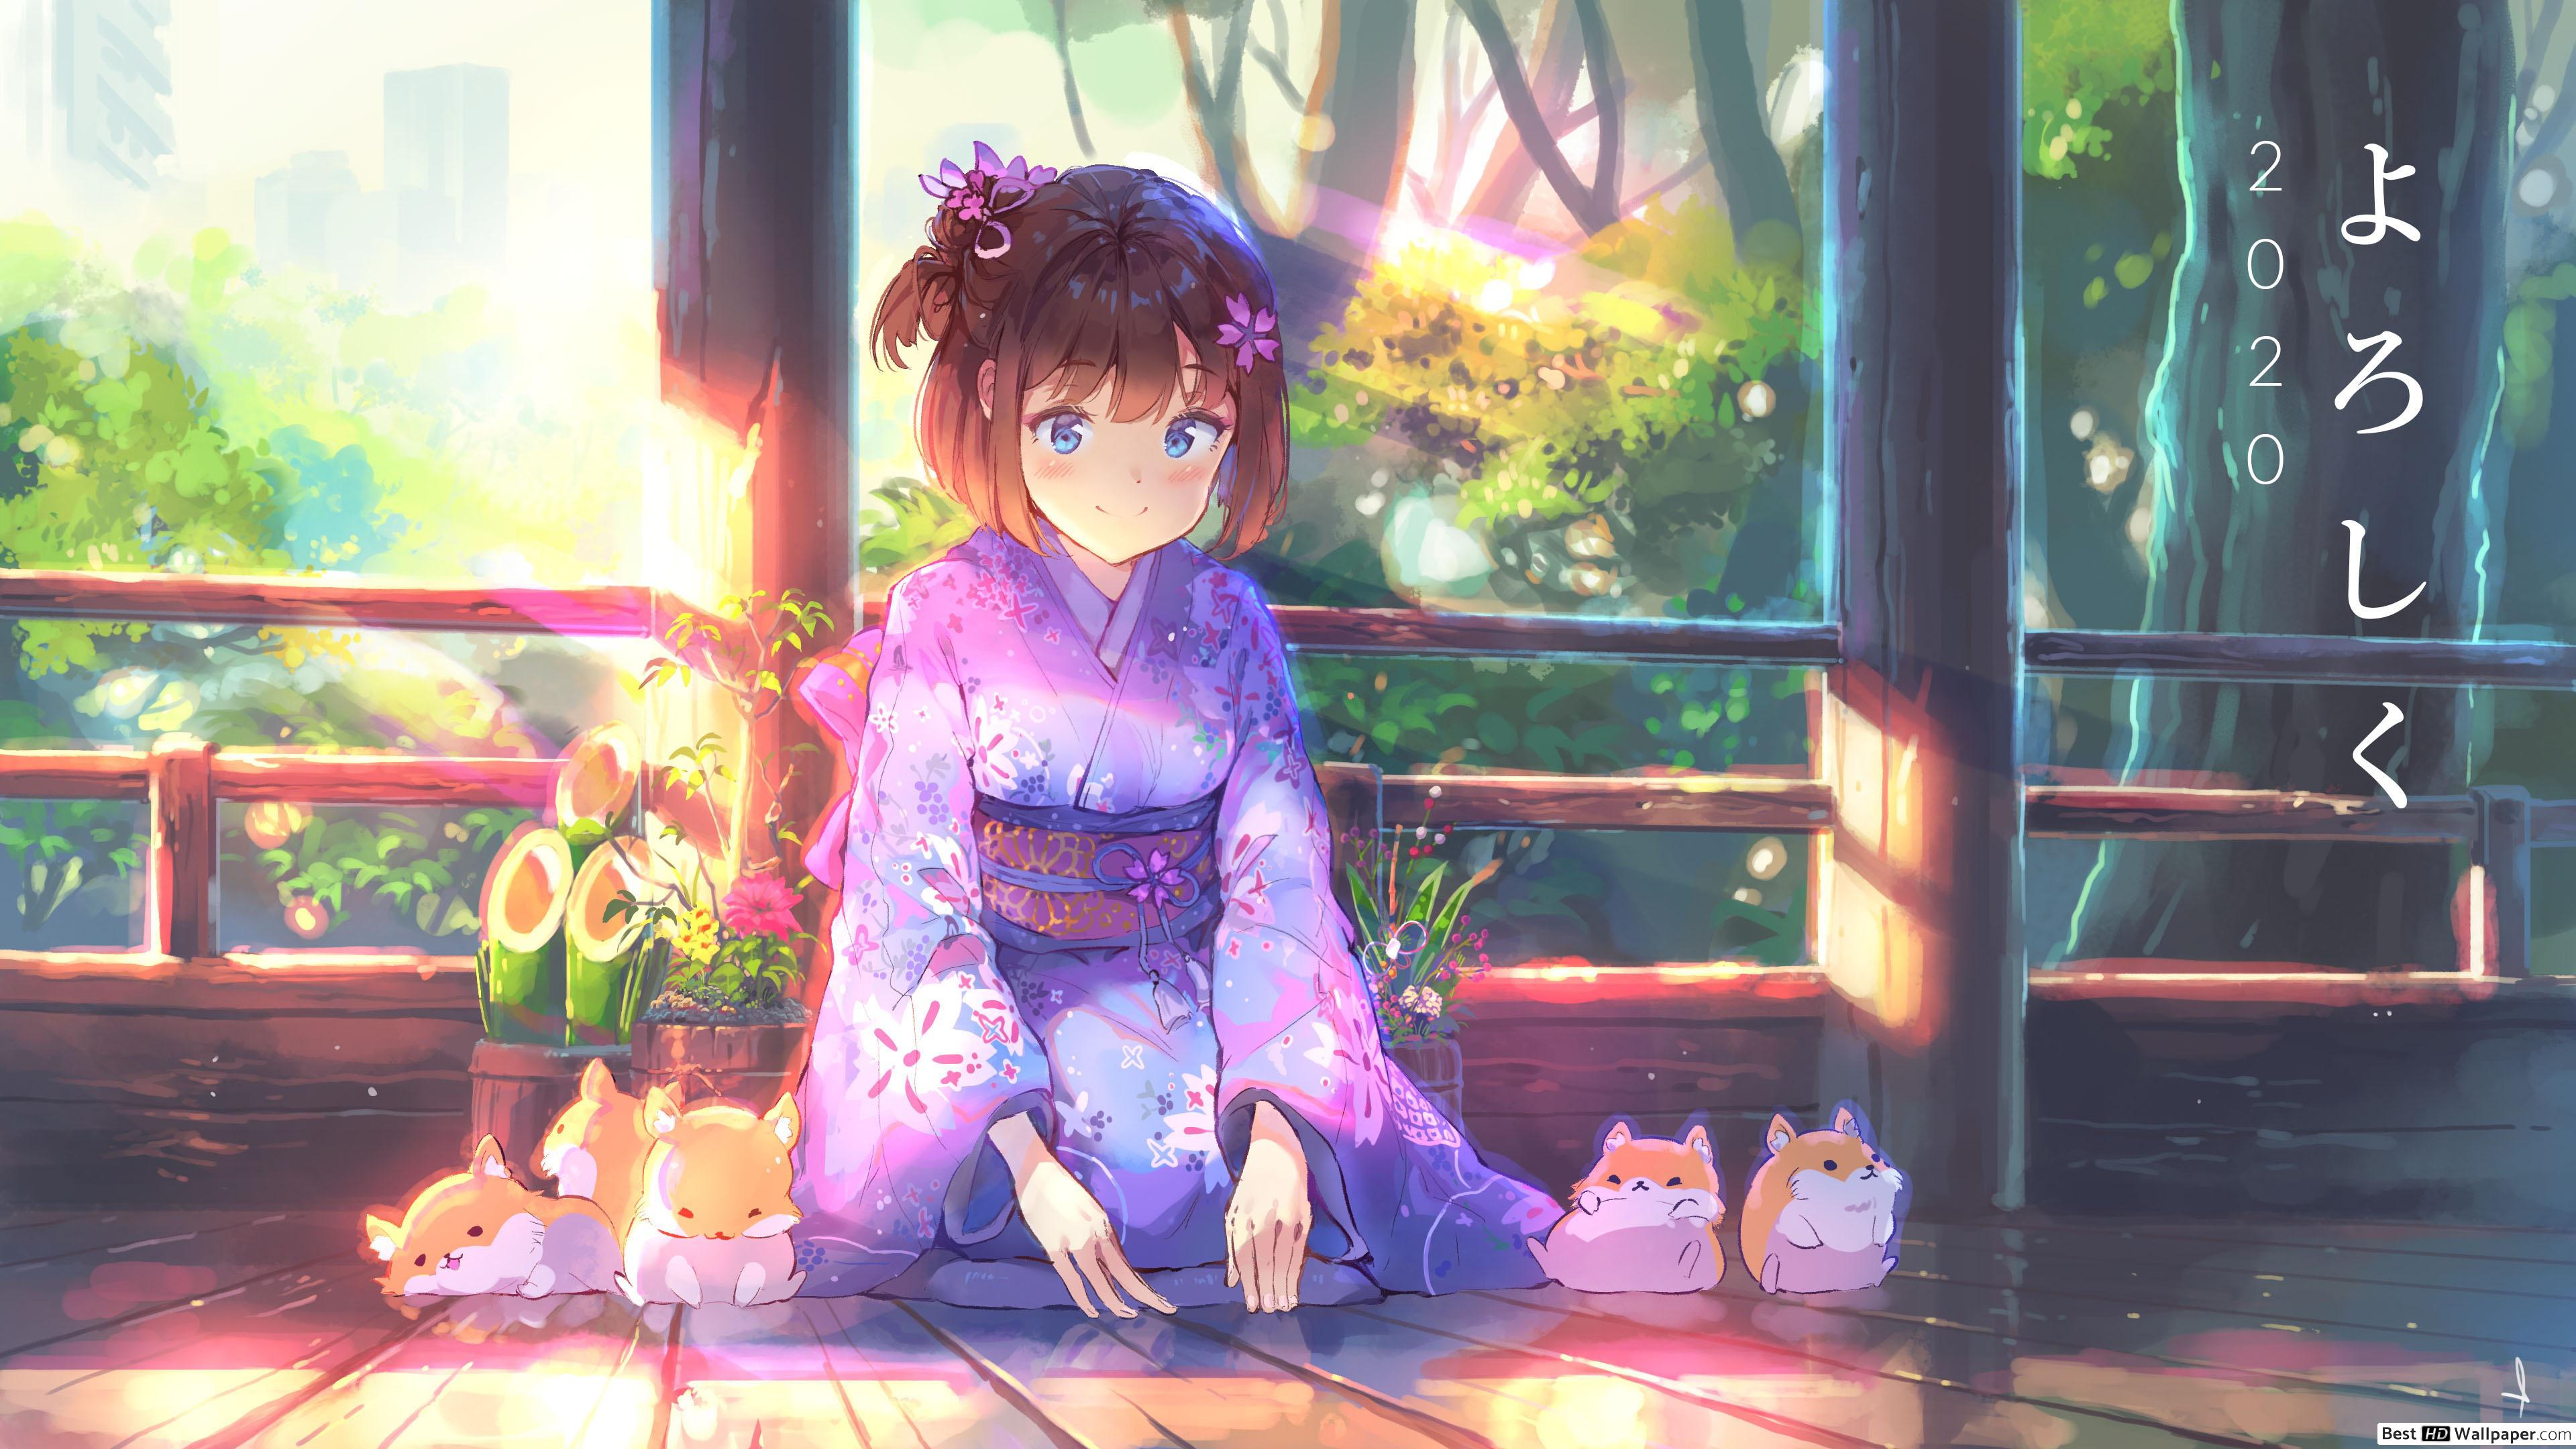 Anime New Year 2020 HD wallpaper download